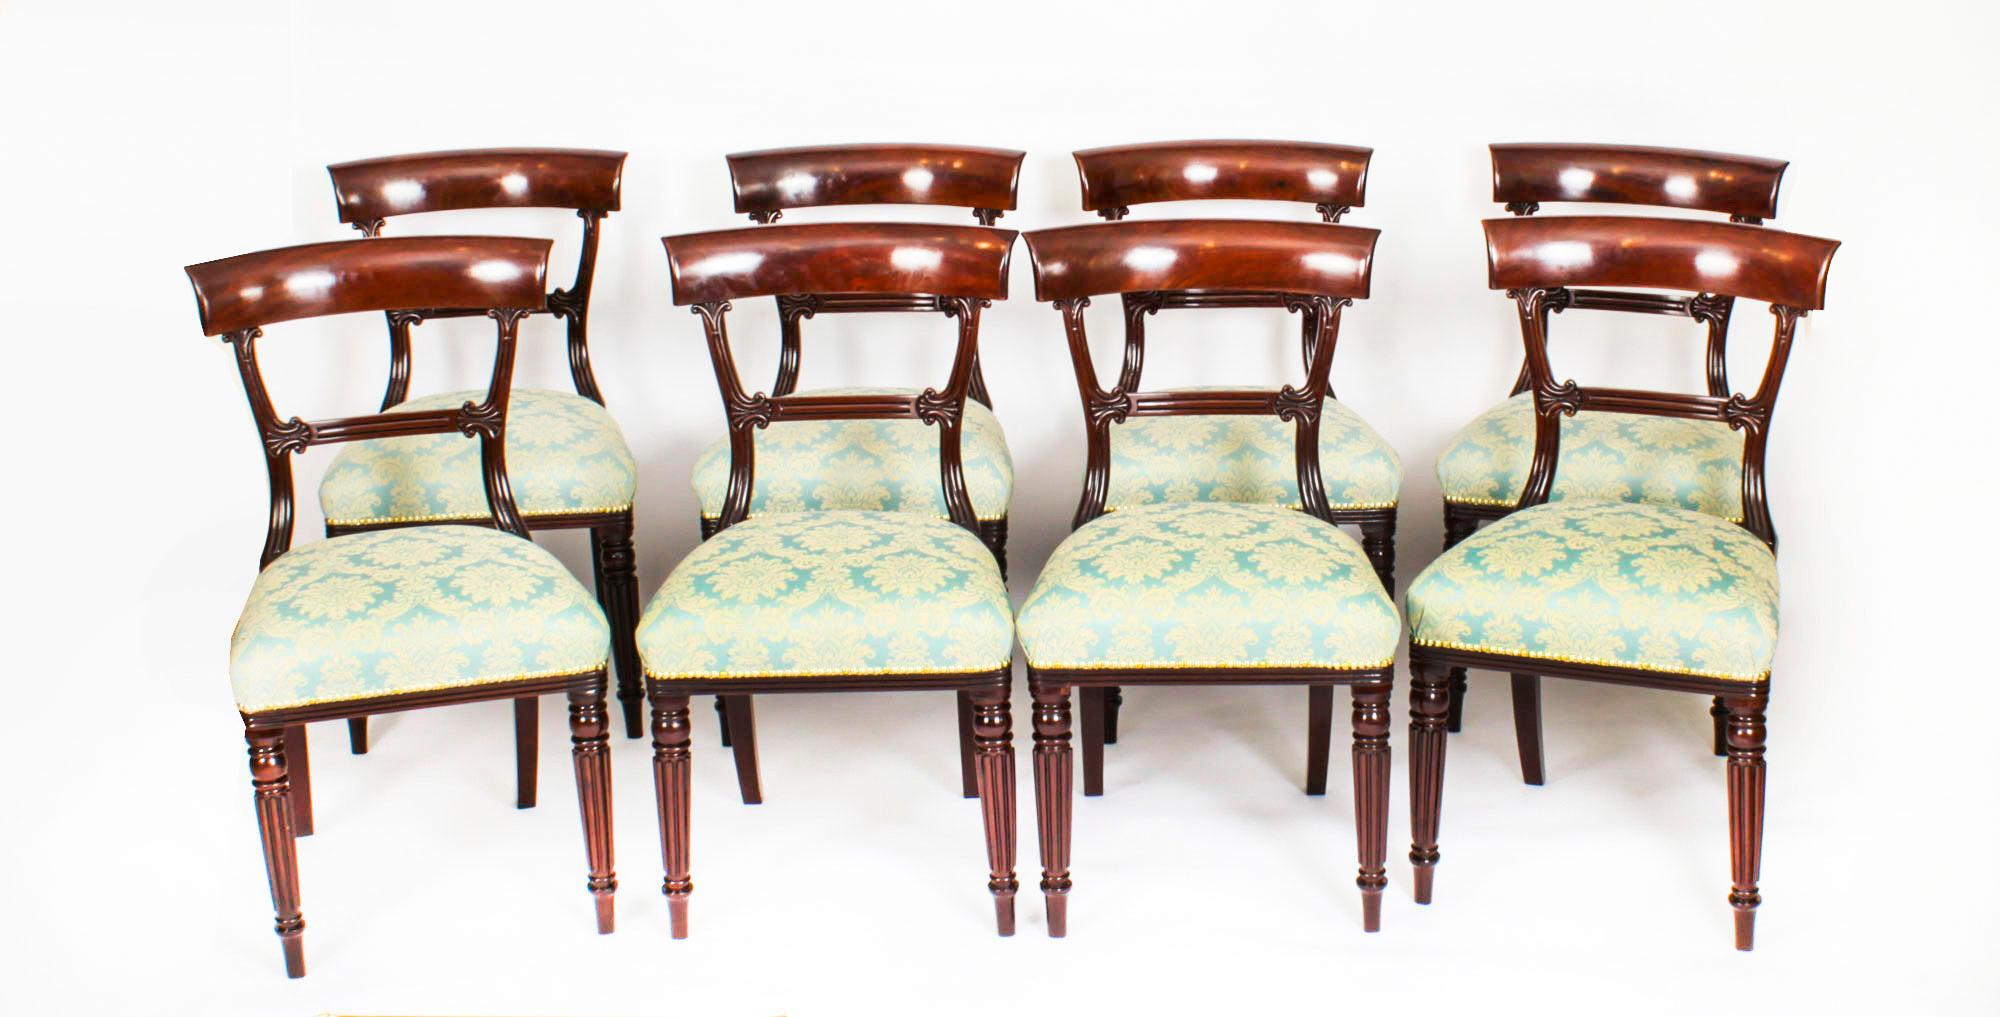 Antique Set 8 English William IV Barback Dining Chairs Circa 1830 19th C For Sale 5